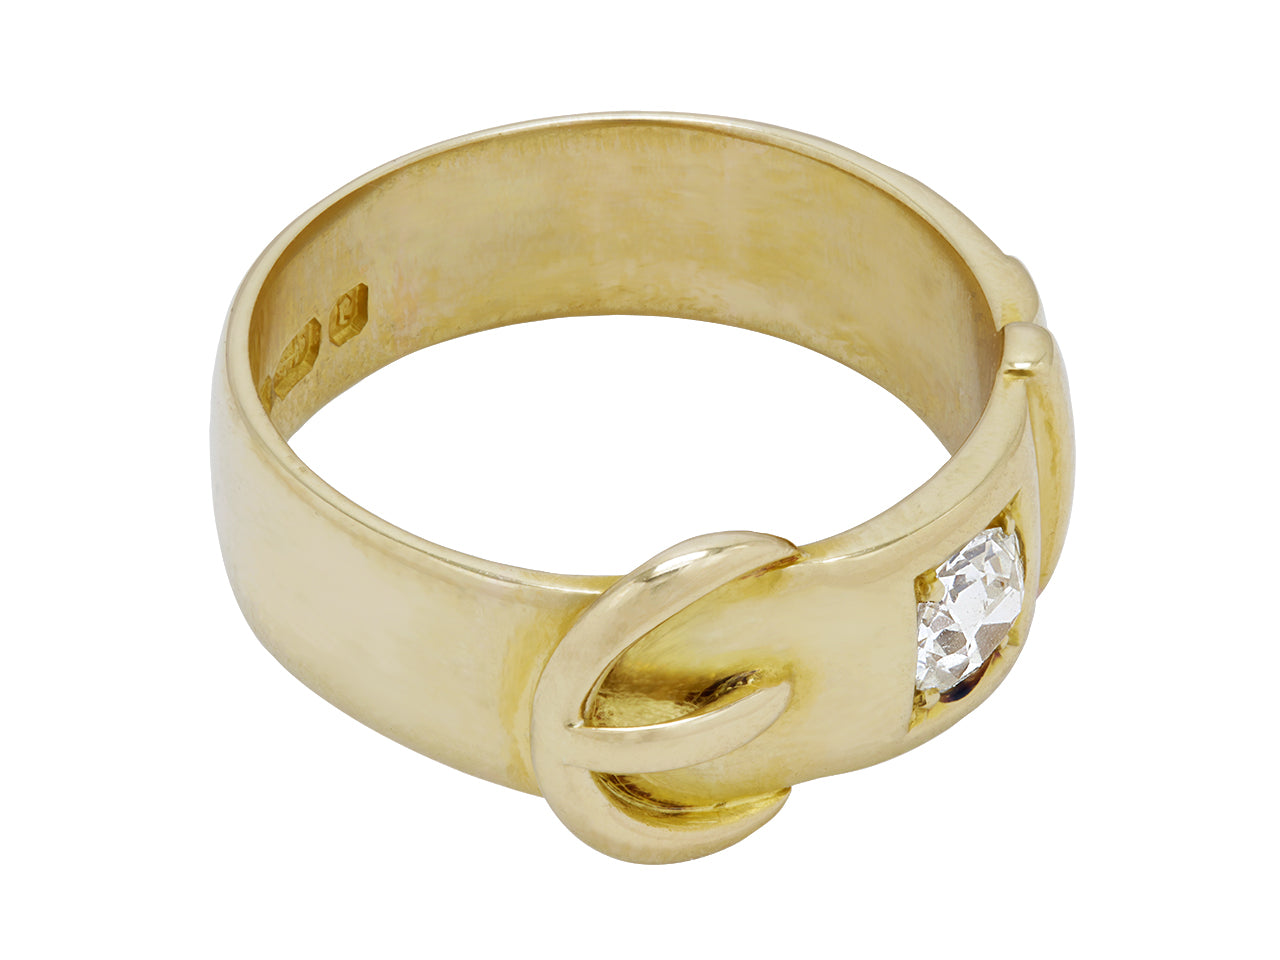 Antique Victorian Diamond Buckle Ring in 18K Gold